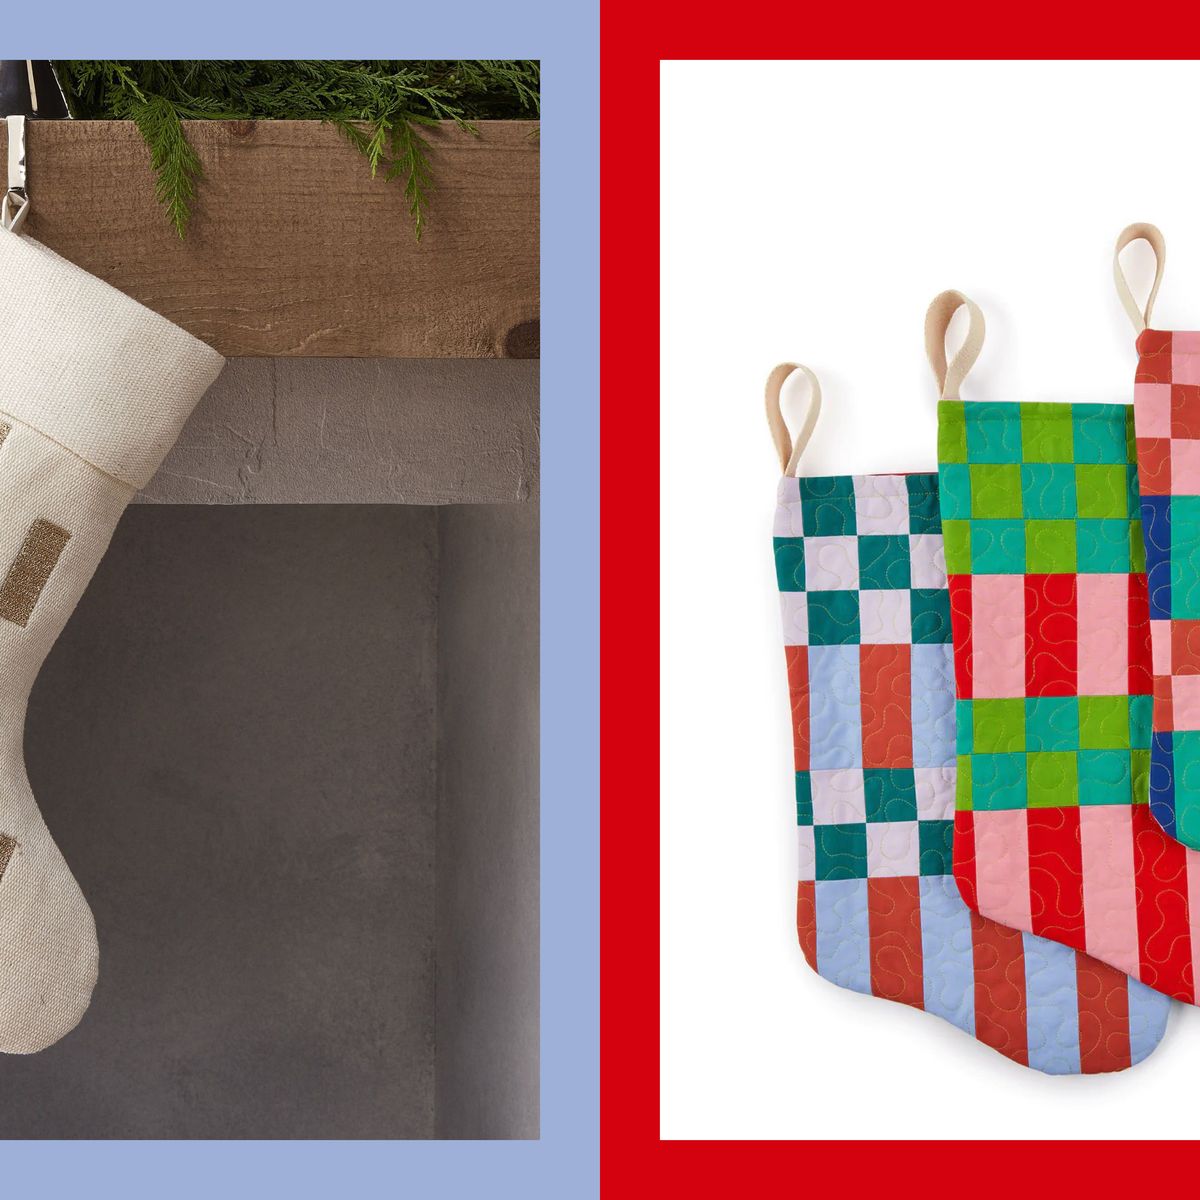 Needlepoint Christmas Stocking, Holiday Items at L.L.Bean